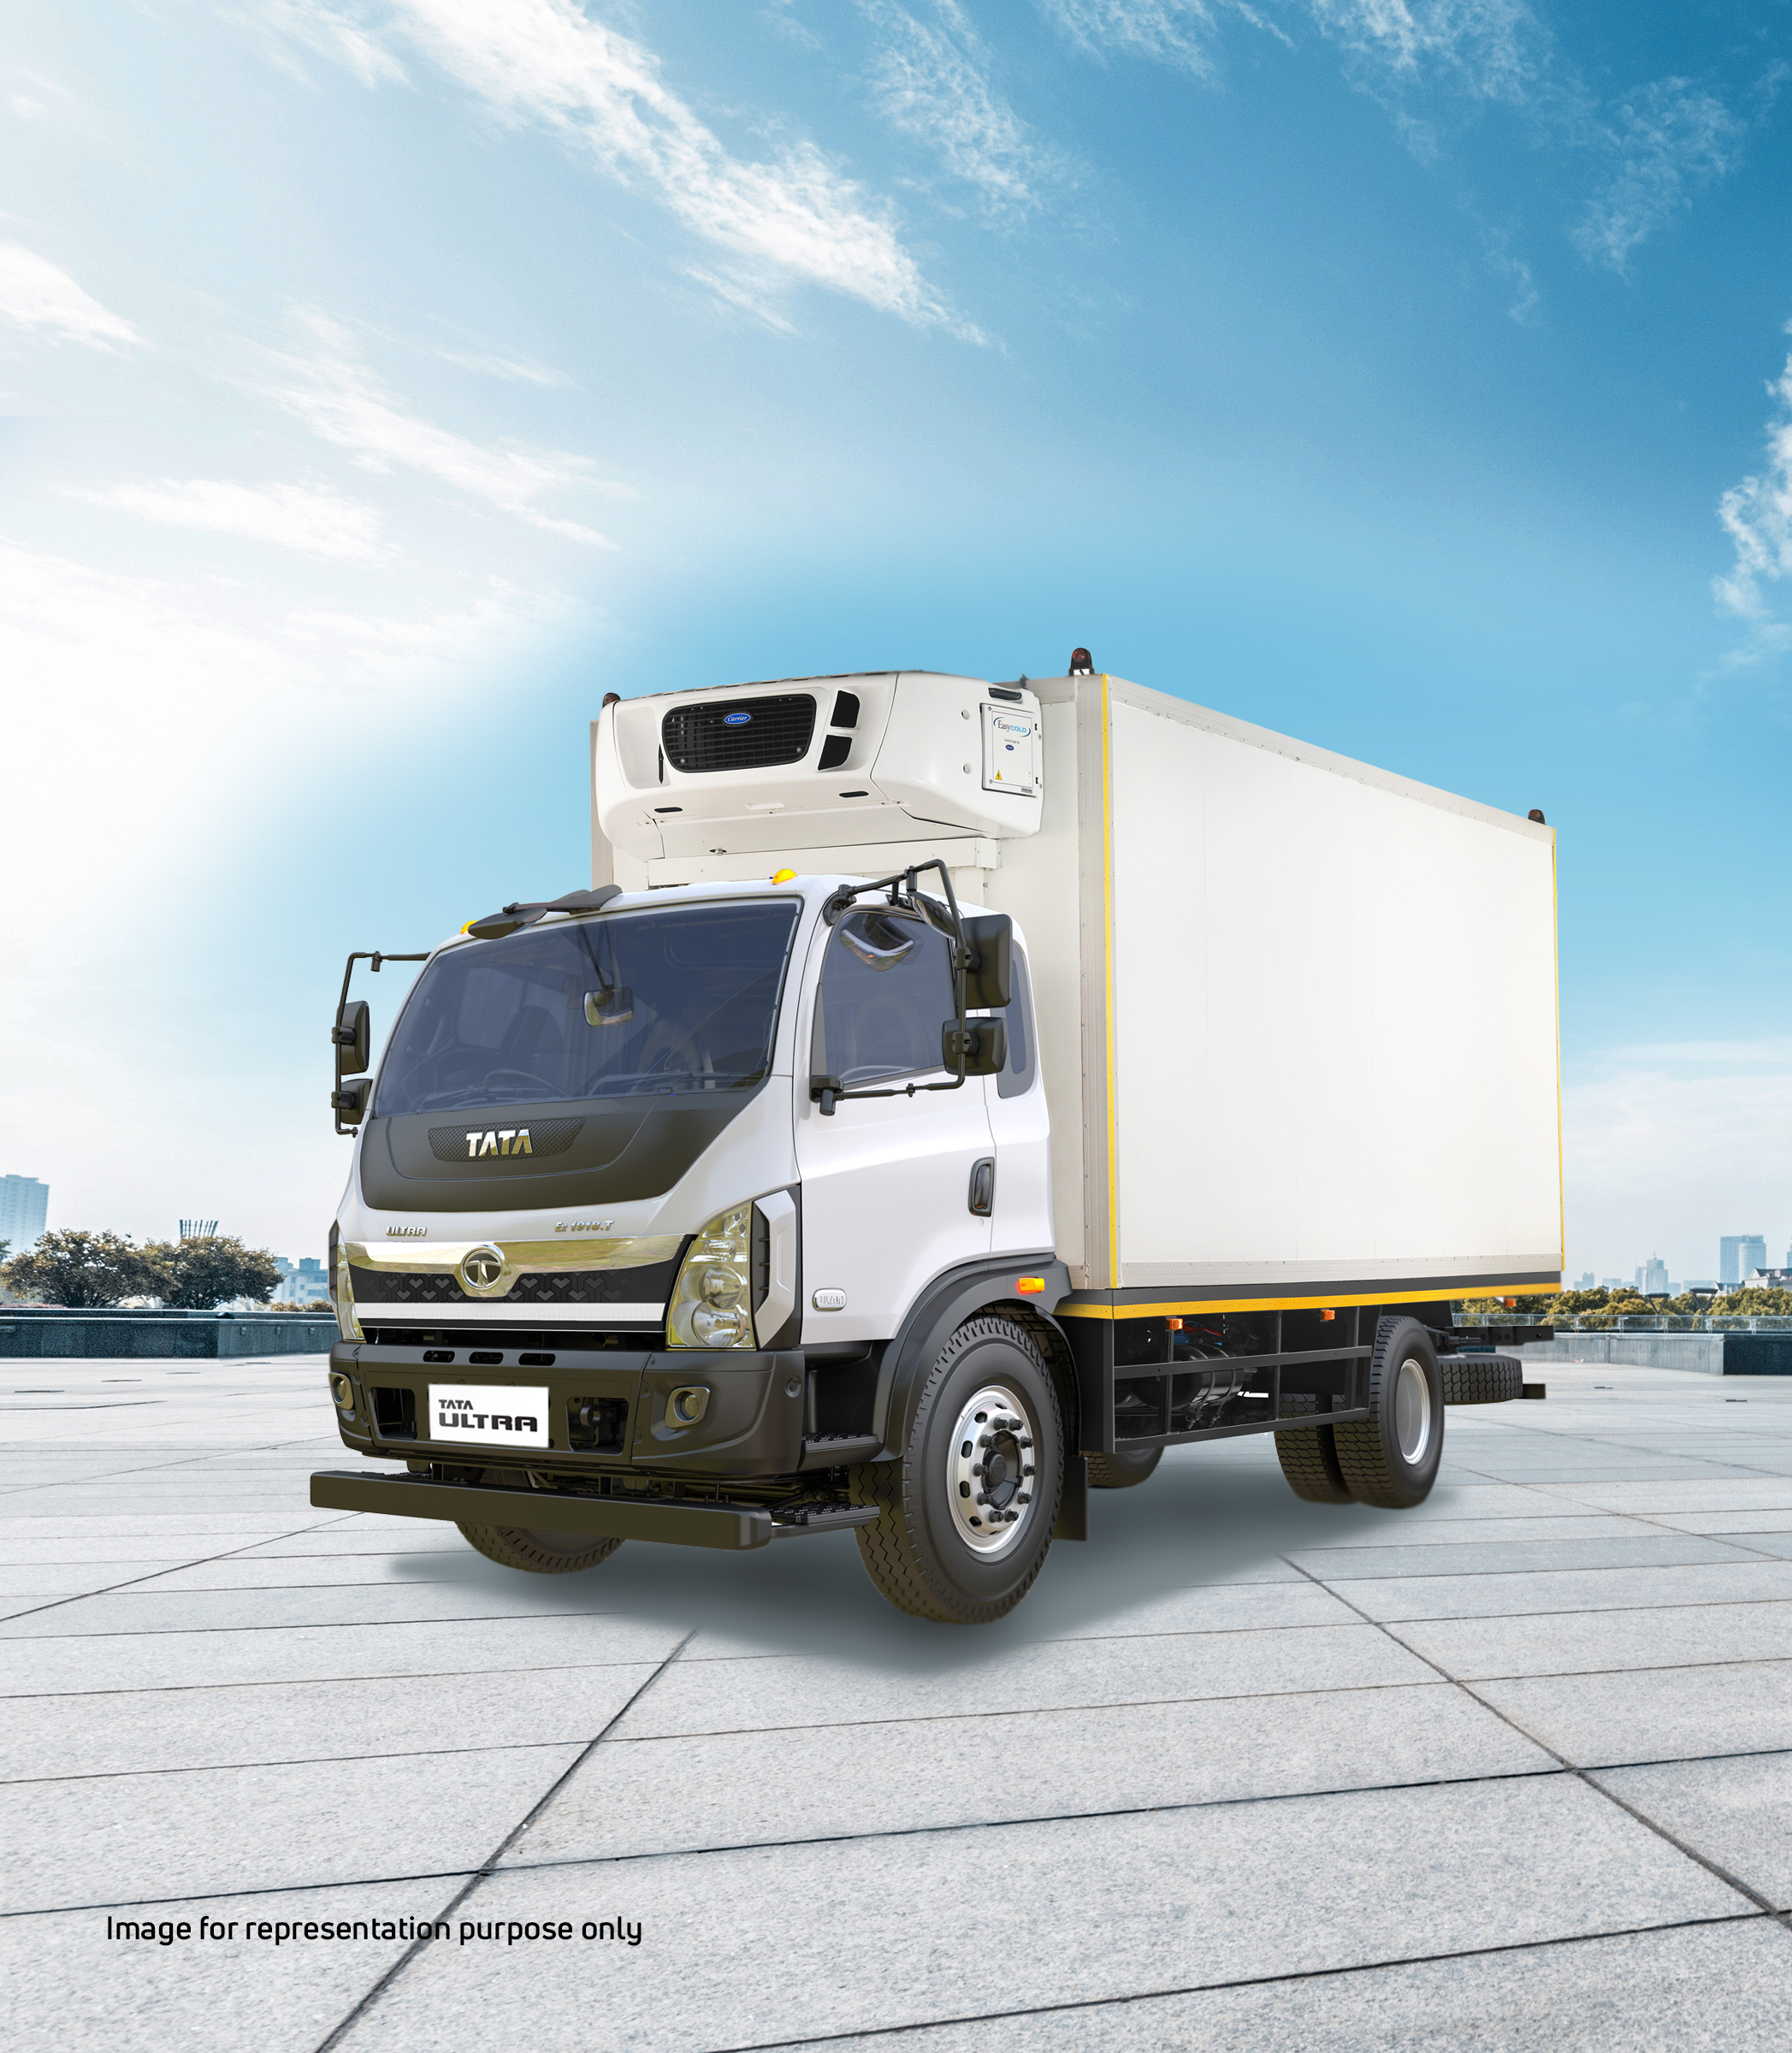 Tata Motors Offers A Wide Range Of Refrigerated Trucks For End-To-End COVID-19 Vaccine Transportation